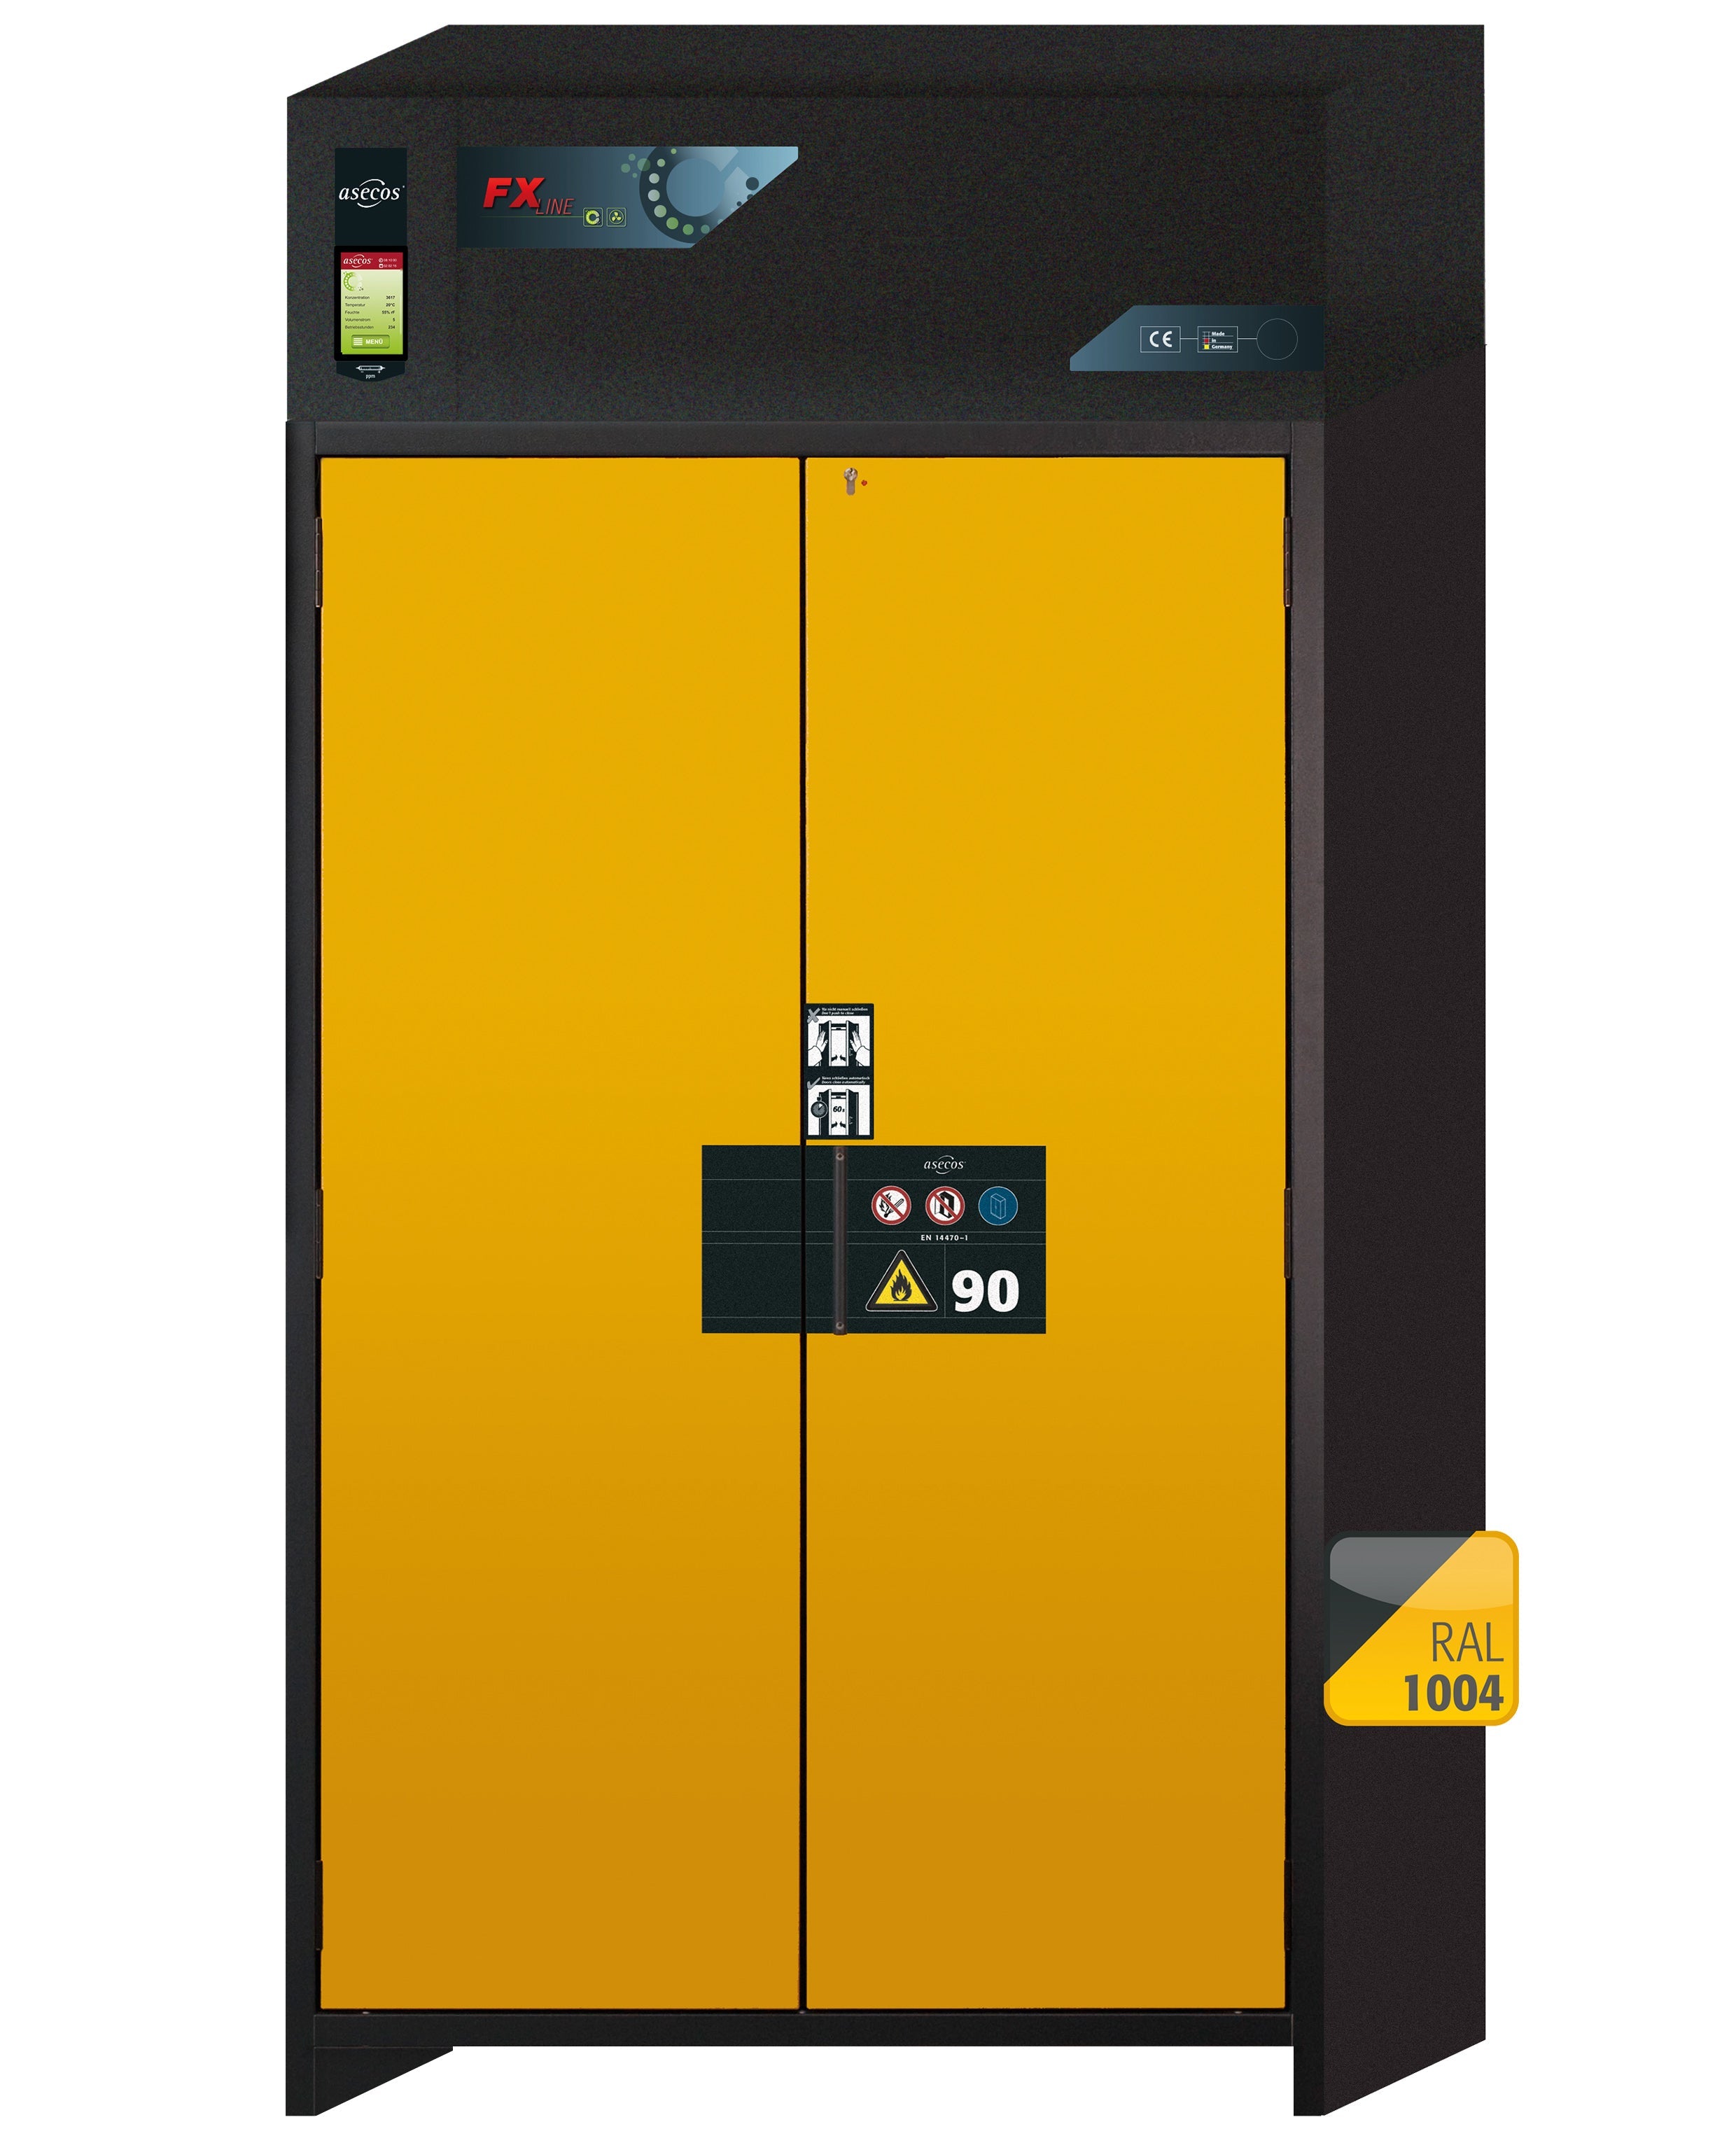 Type 90 recirculating air filter cabinet FX-PEGASUS-90 model FX90.229.120.WDAC in safety yellow RAL 1004 with 5x standard pull-out tray (sheet steel)